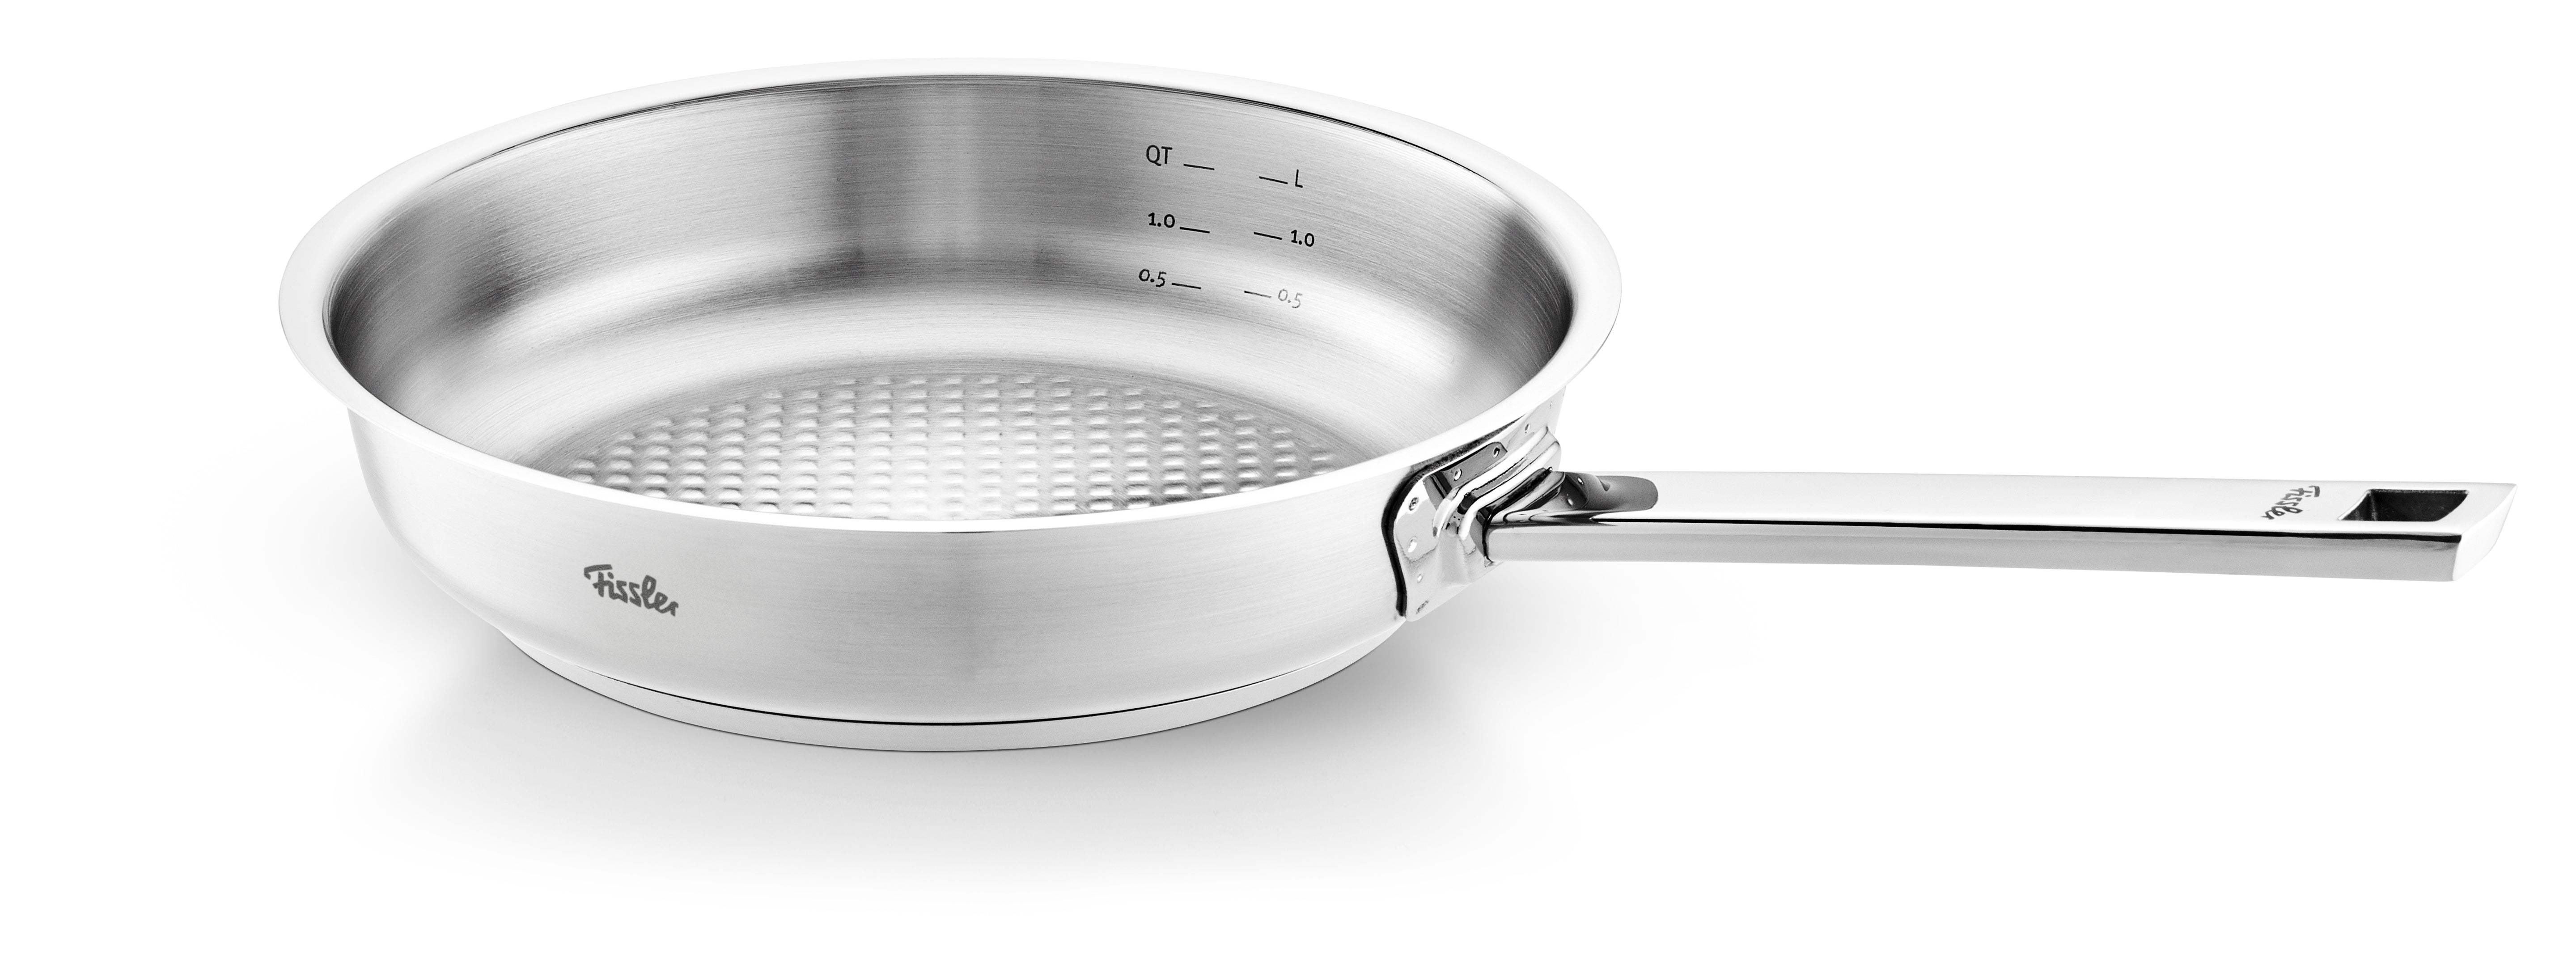 Fissler - Original-Profi Collection® Stainless Steel Frying Pan, 9.5 Inch